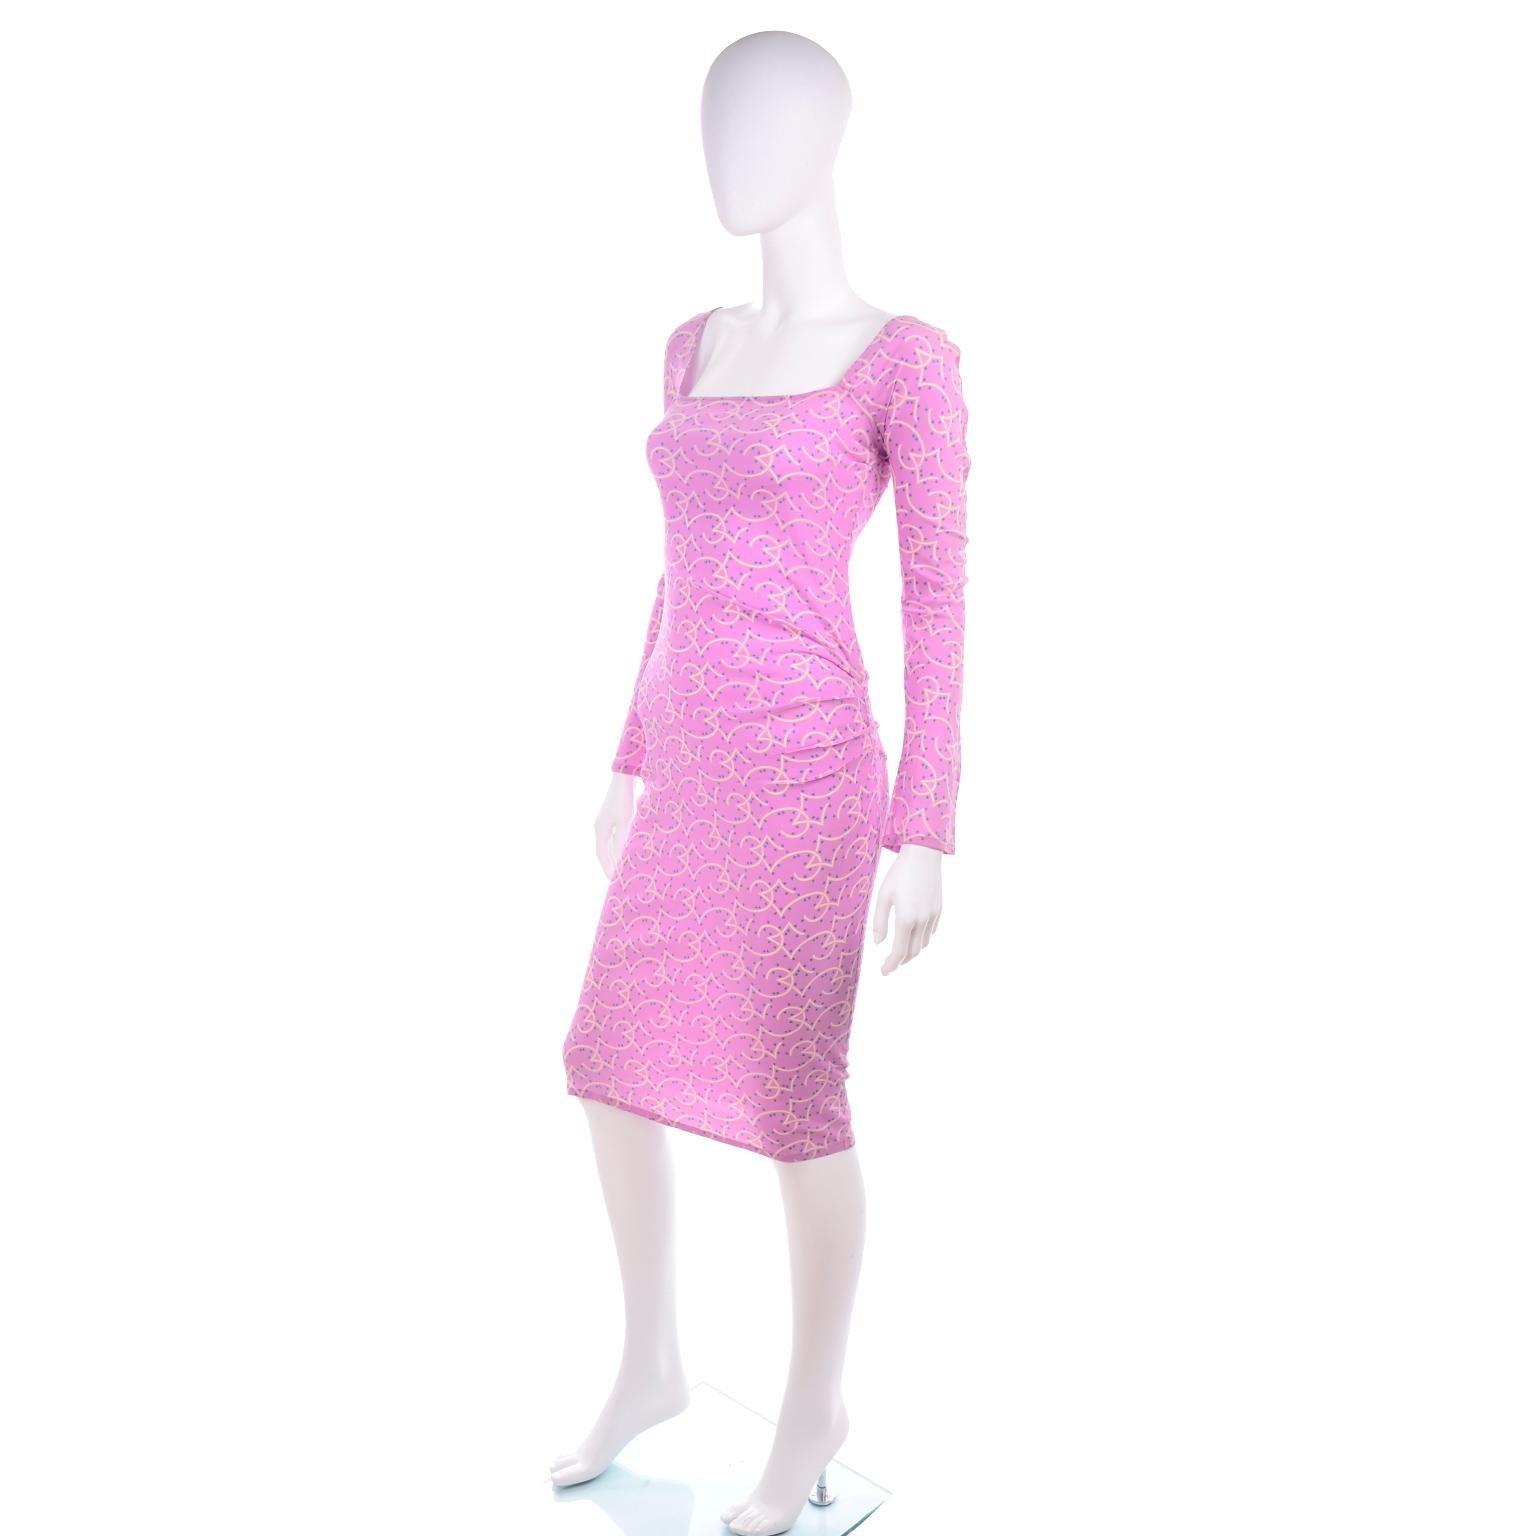 This is a Gianni Versace documented 1998 Runway Dress in a delicate purple and pink silk with cream geometry cloud like shapes and tiny blue stars . The dress has a square neckline and the left portion of waist and hips has pleat like ruching that